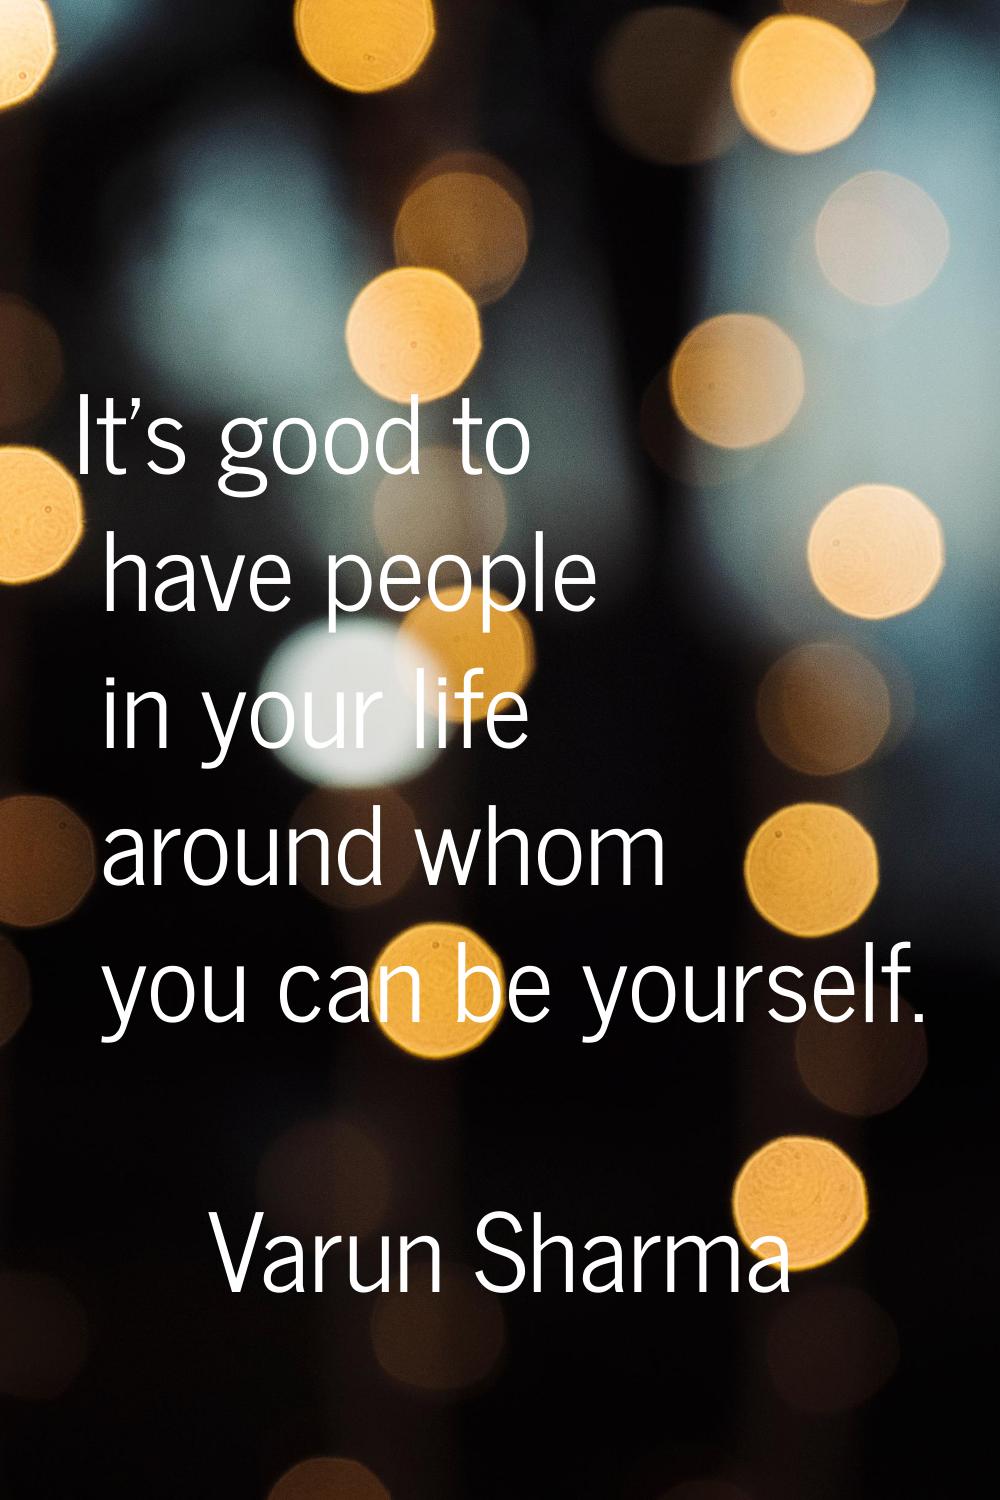 It's good to have people in your life around whom you can be yourself.